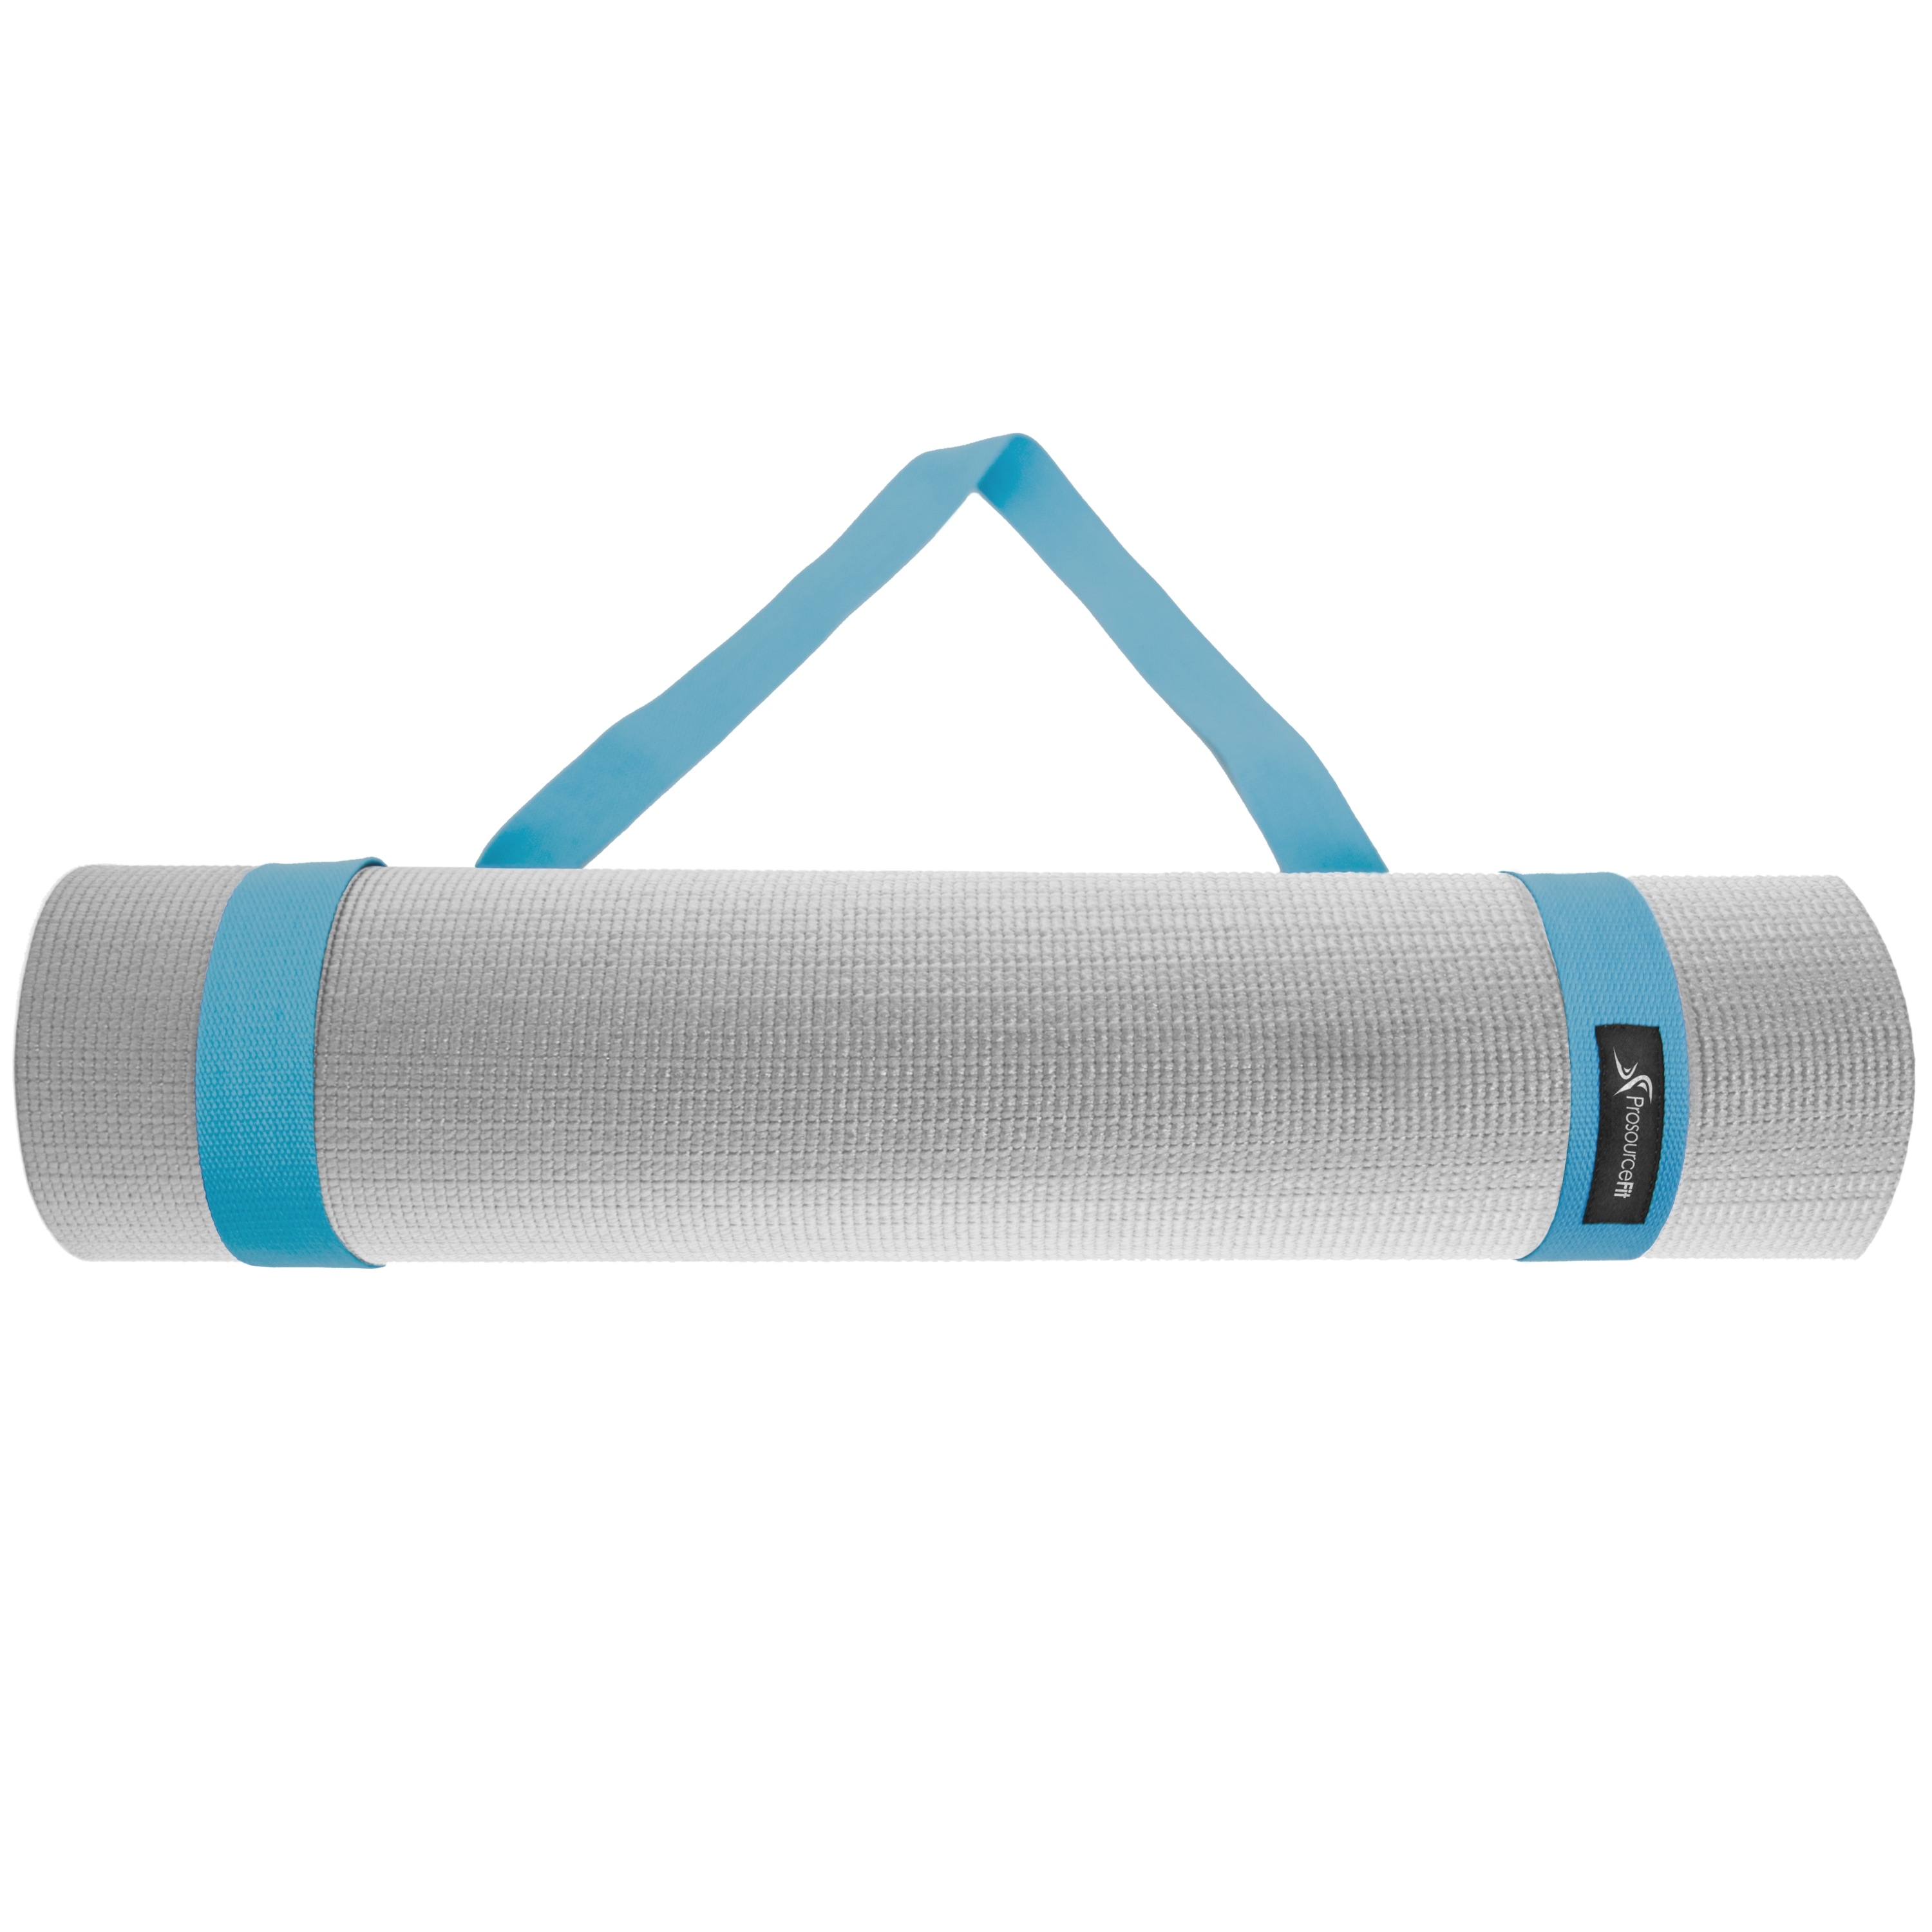 Prosource Fit Yoga Mat Cotton Sling Carry Strap 